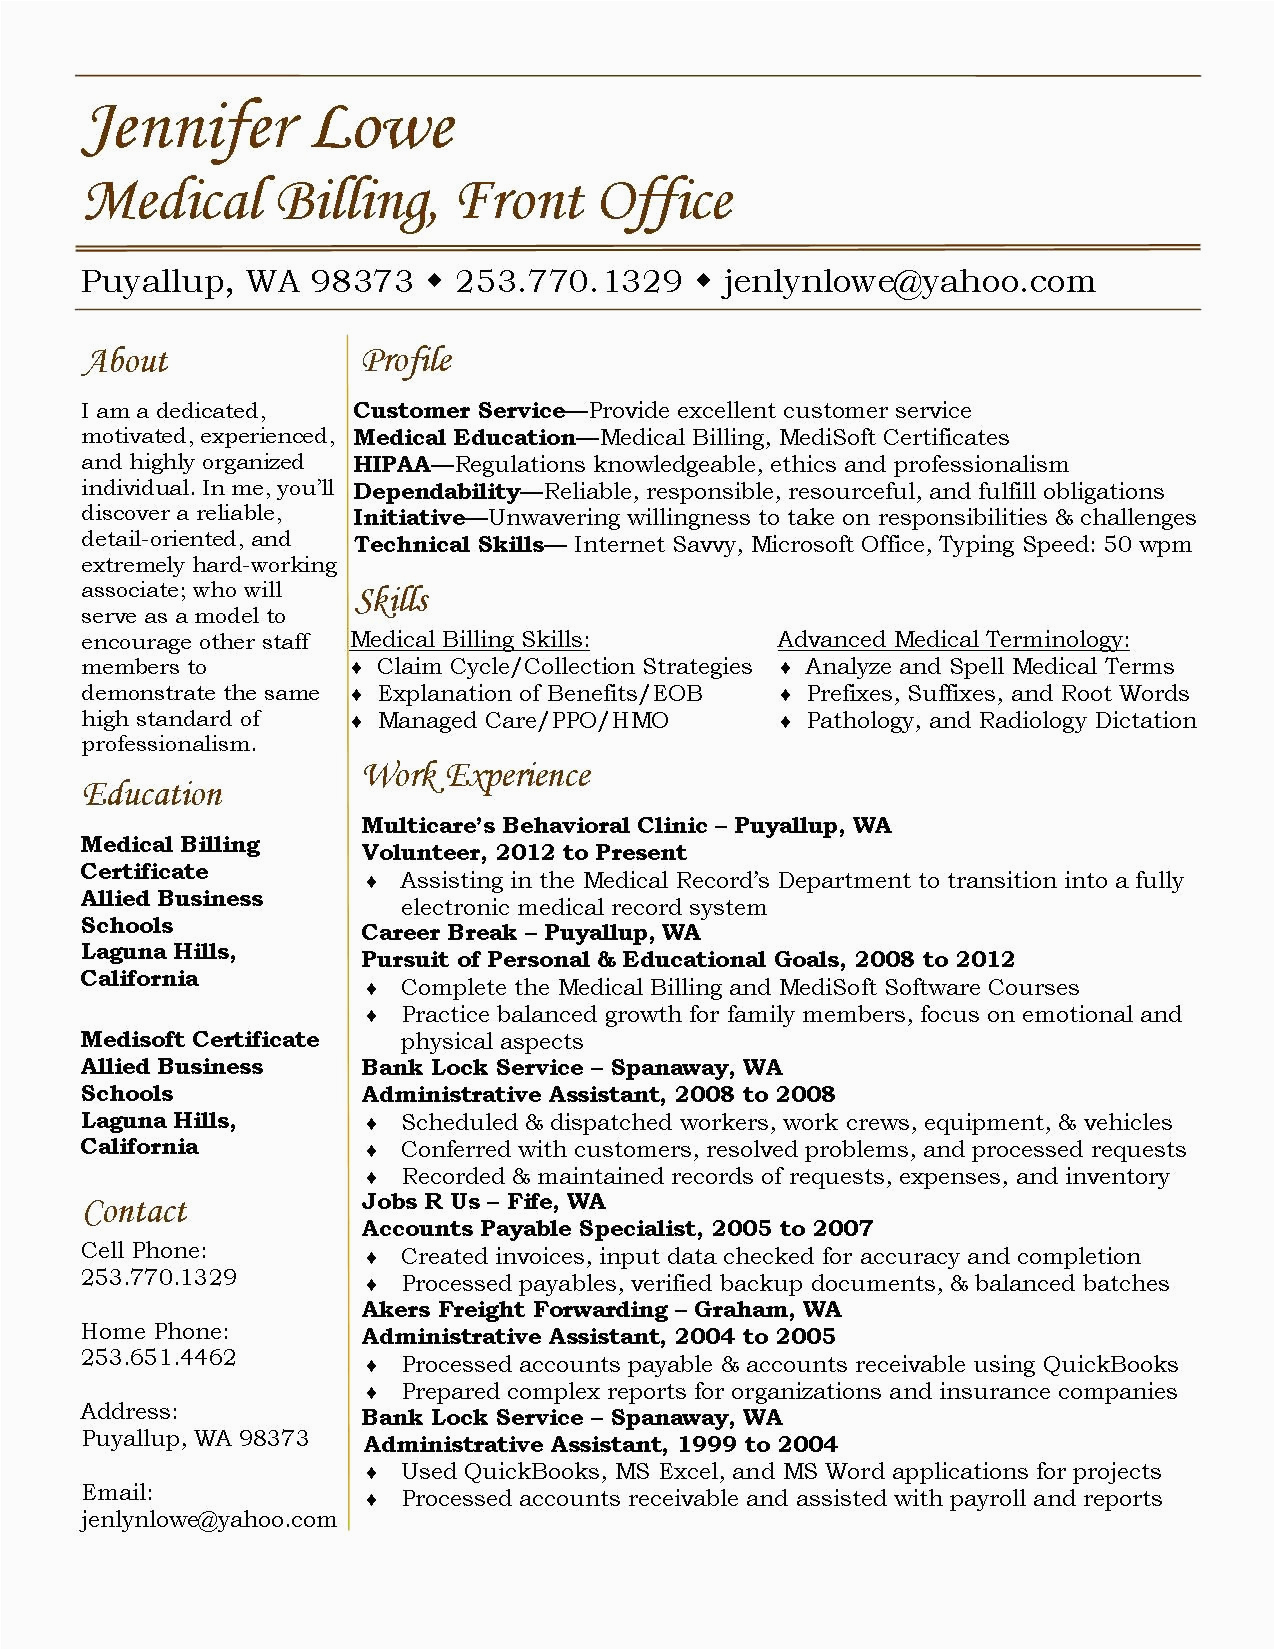 Functional Medical Coding and Billing Specialist Resume Sample 17 Medical Billing and Coding Resume Sample Cprojects — Db Excel